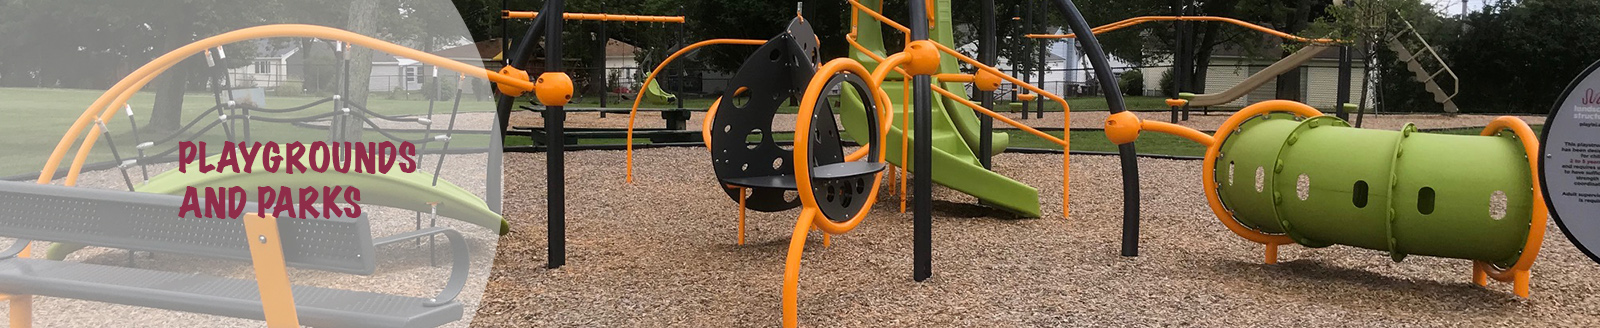 Orchard Park Recreation - Parks & Playgrounds